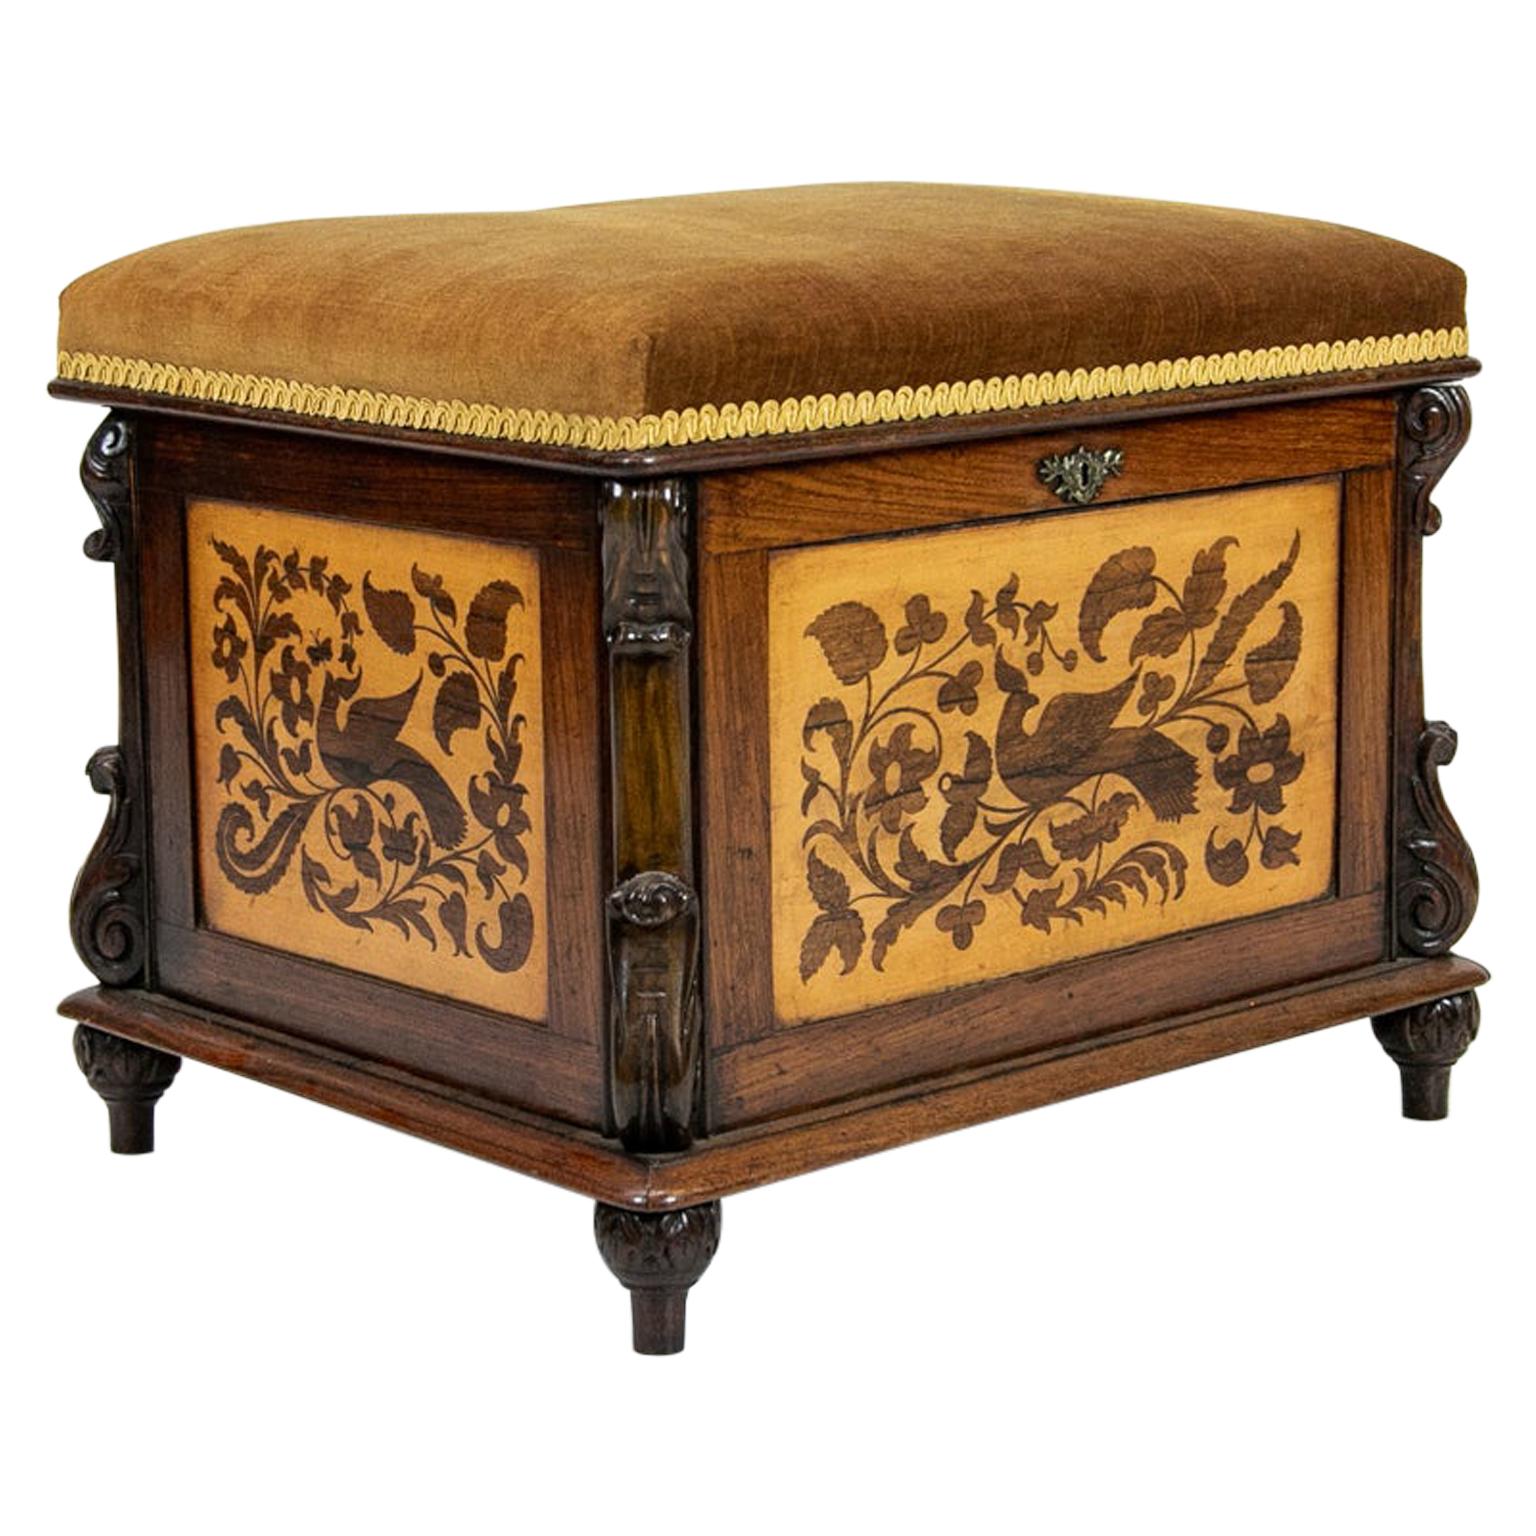 19th Century Inlaid Rosewood Lift Top Stool